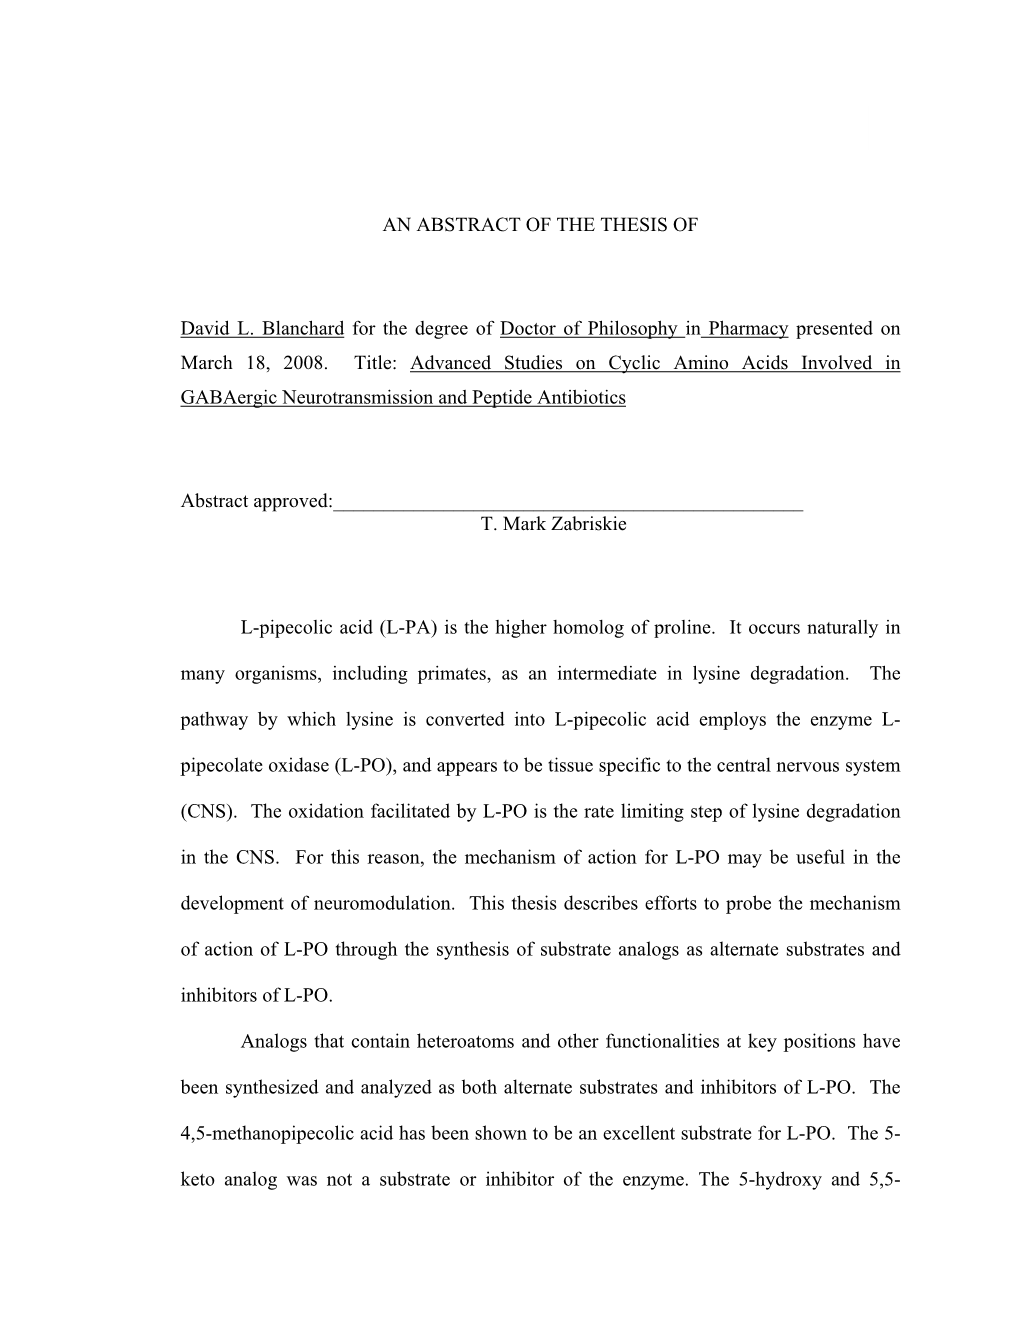 1 an ABSTRACT of the THESIS of David L. Blanchard for the Degree of Doctor of Philosophy in Pharmacy Presented on March 18, 2008